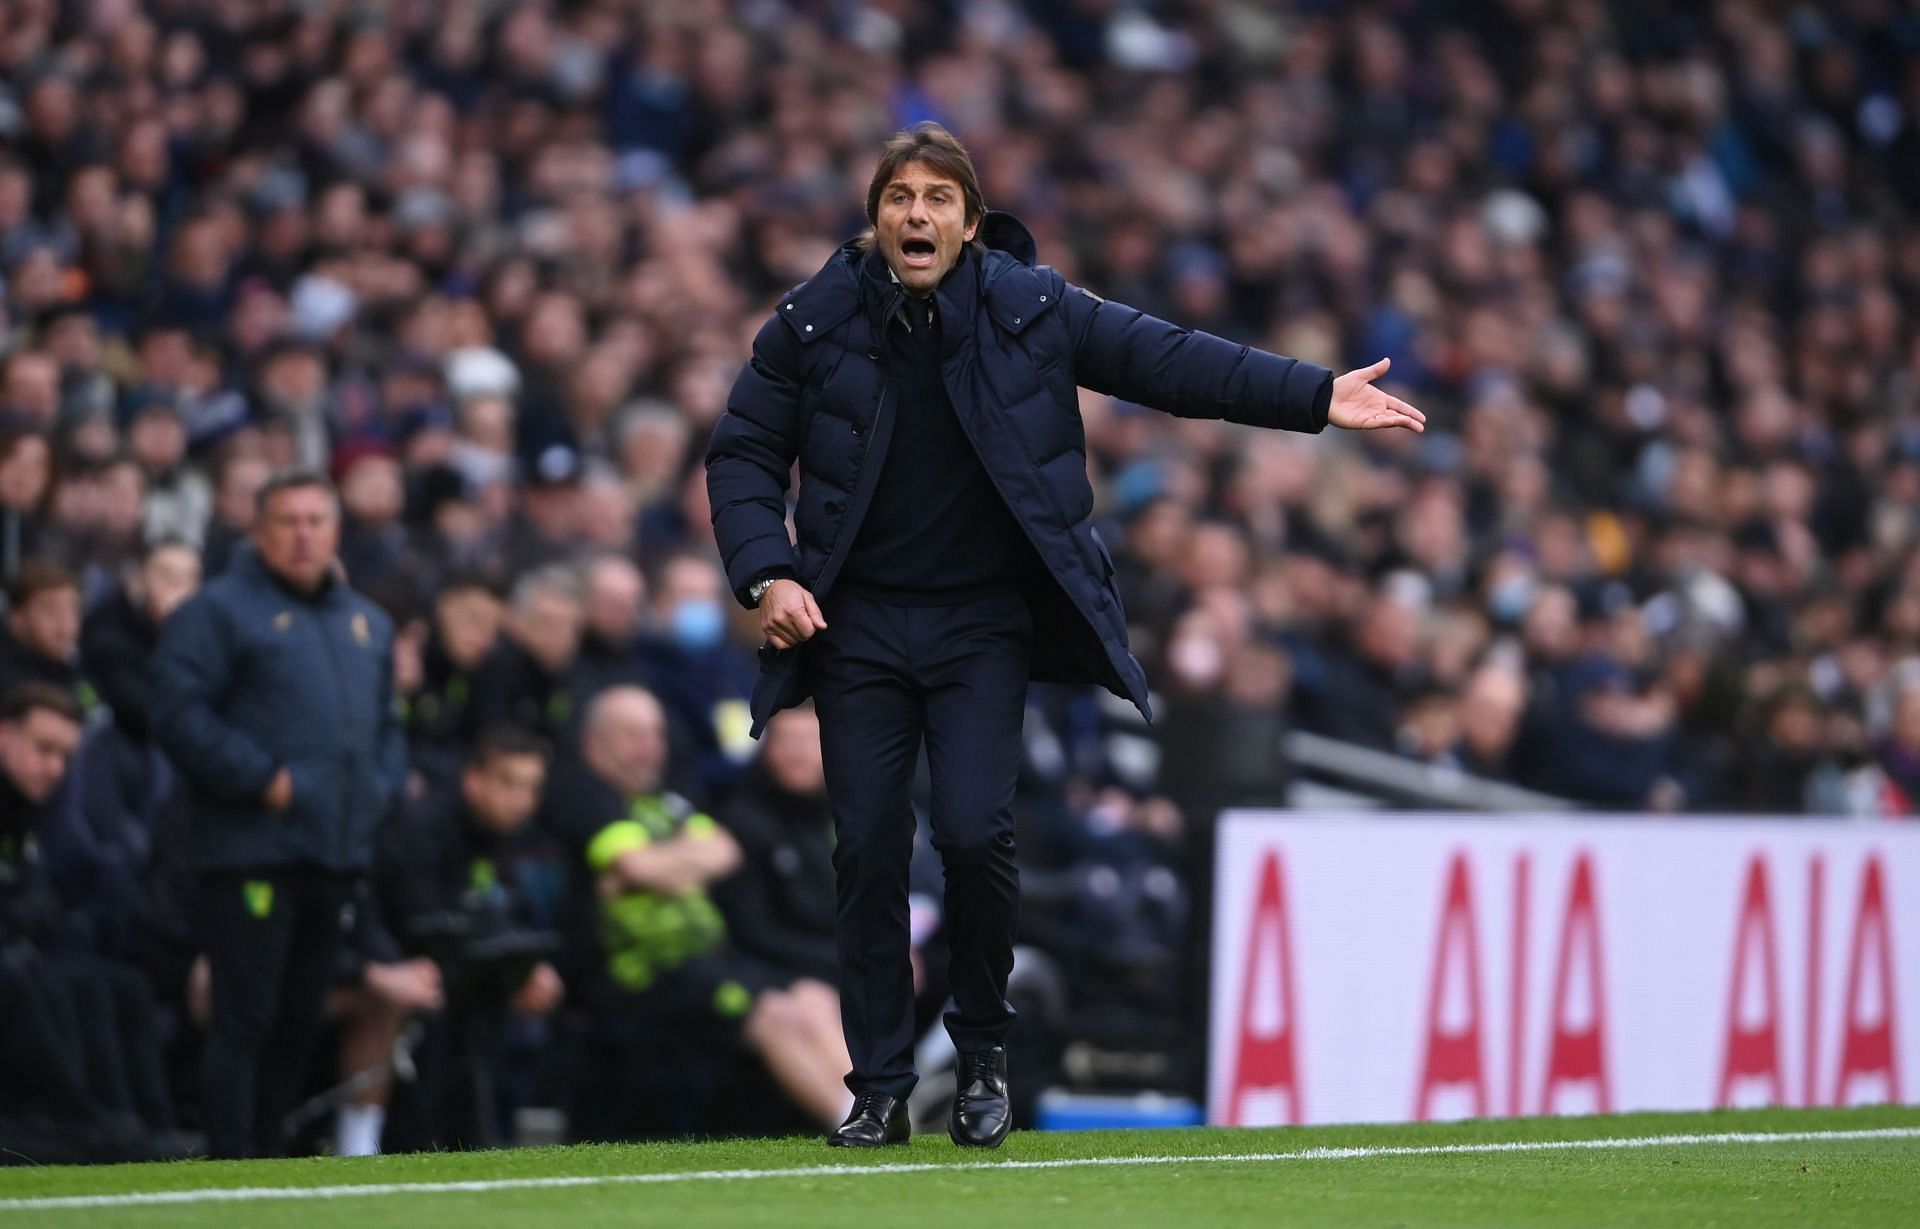 Antonio Conte is looking for reinforcements in the Tottenham Hotspur side